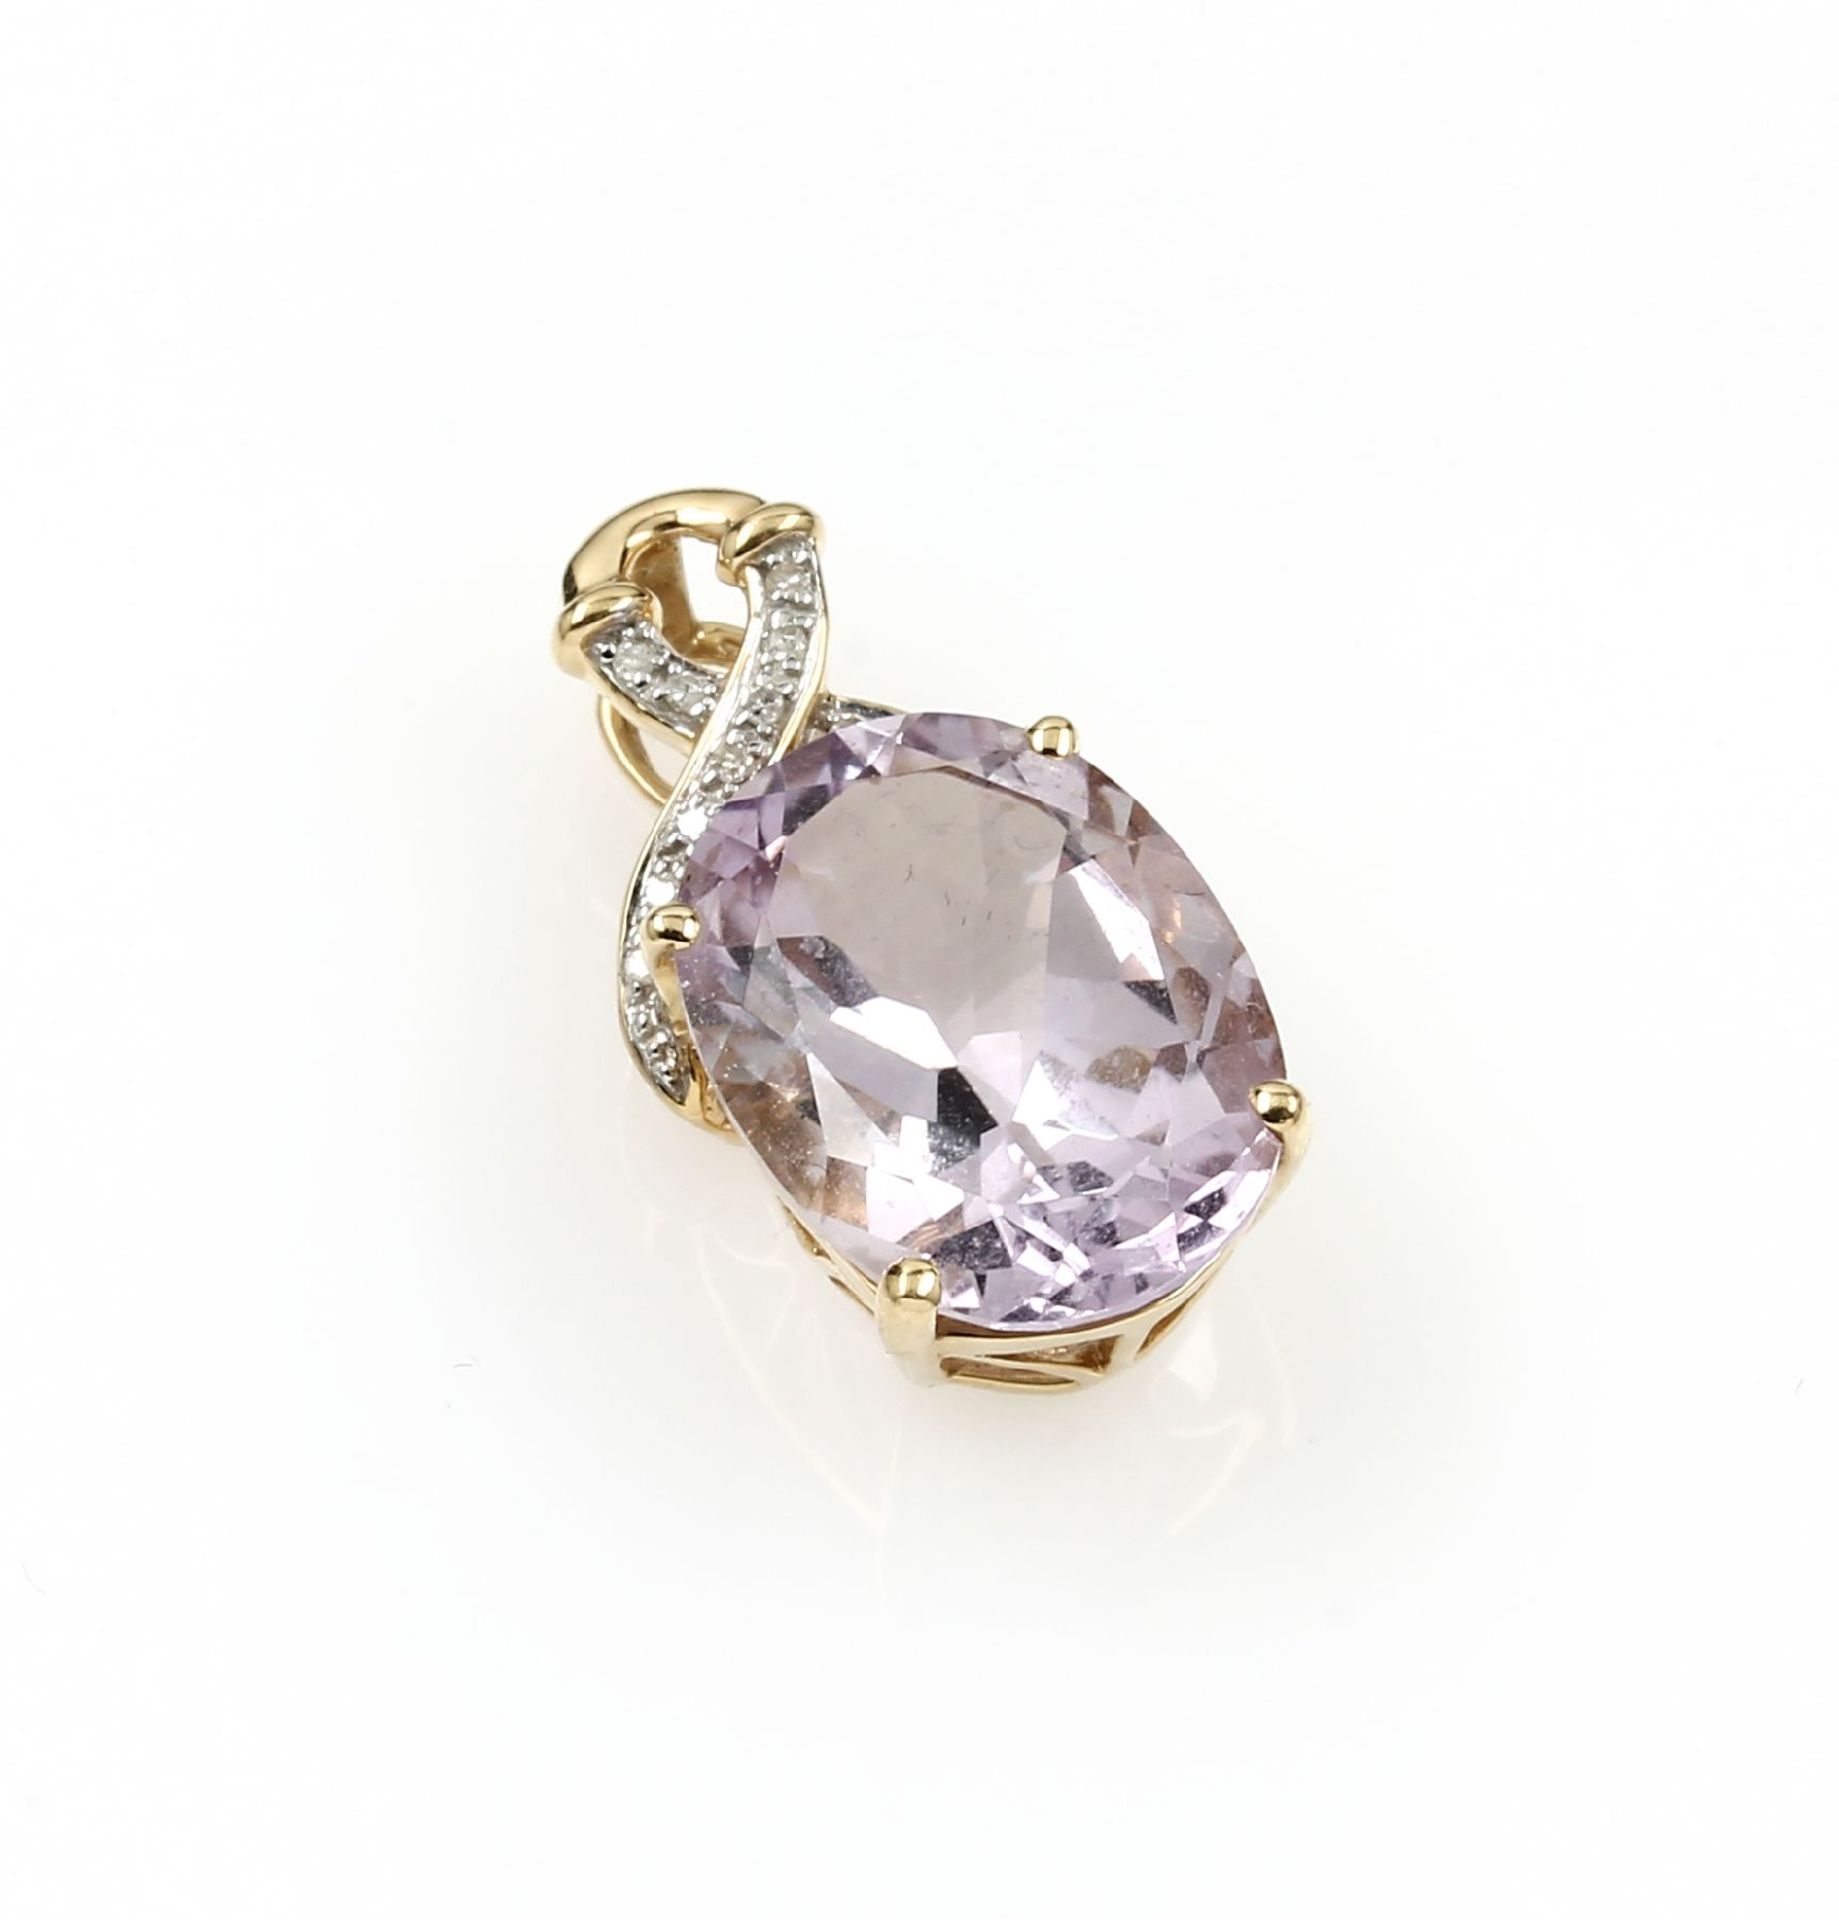 14 kt gold pendant with amethyst and diamonds , YG 585/000, oval bevelled bright amethyst approx.